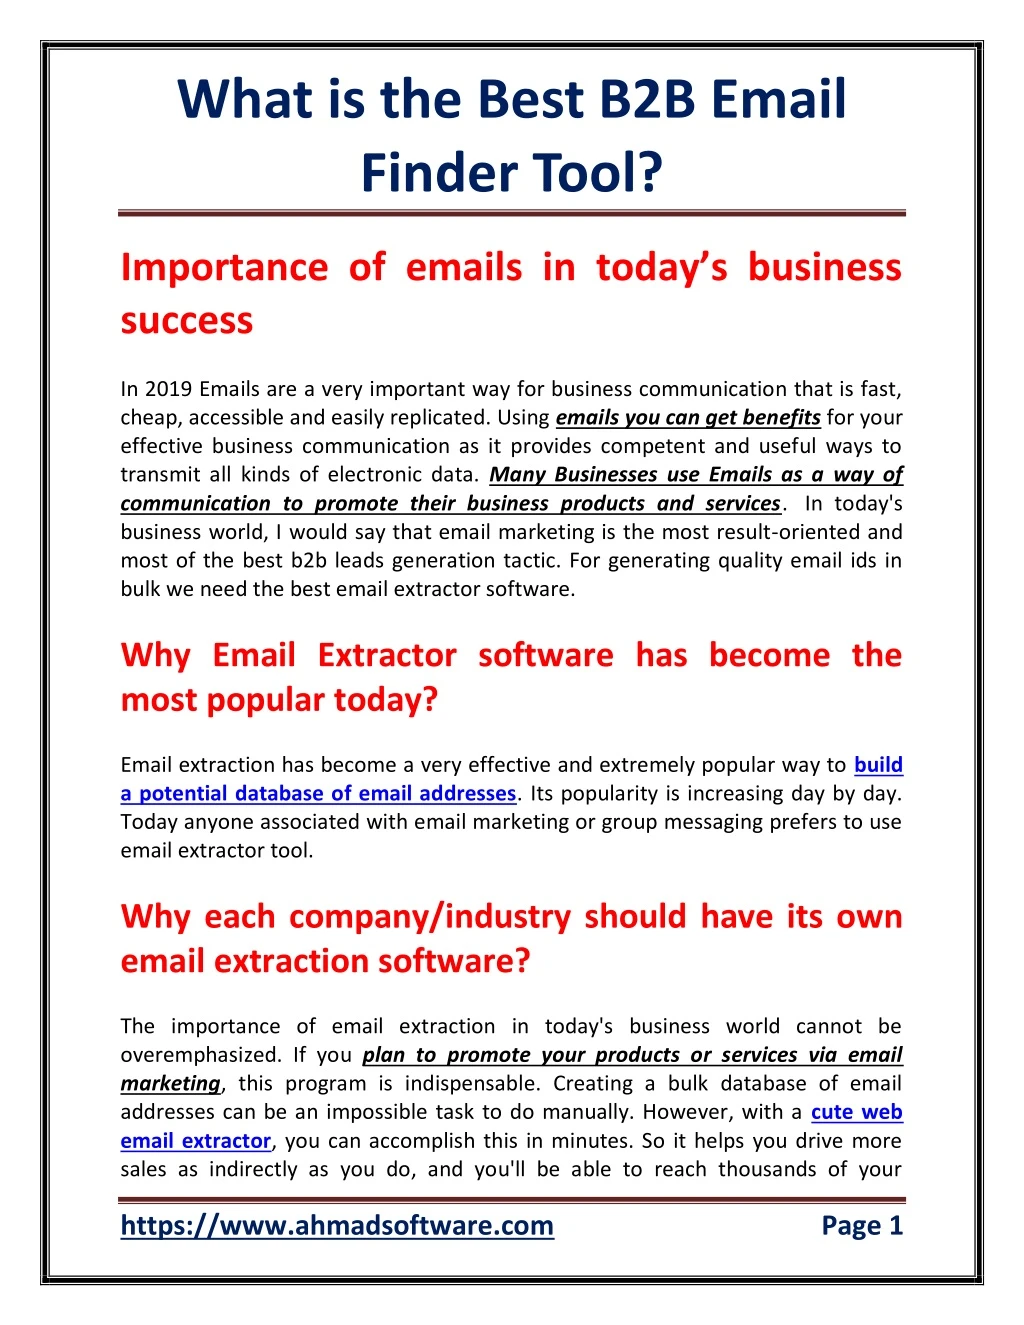 what is the best b2b email finder tool